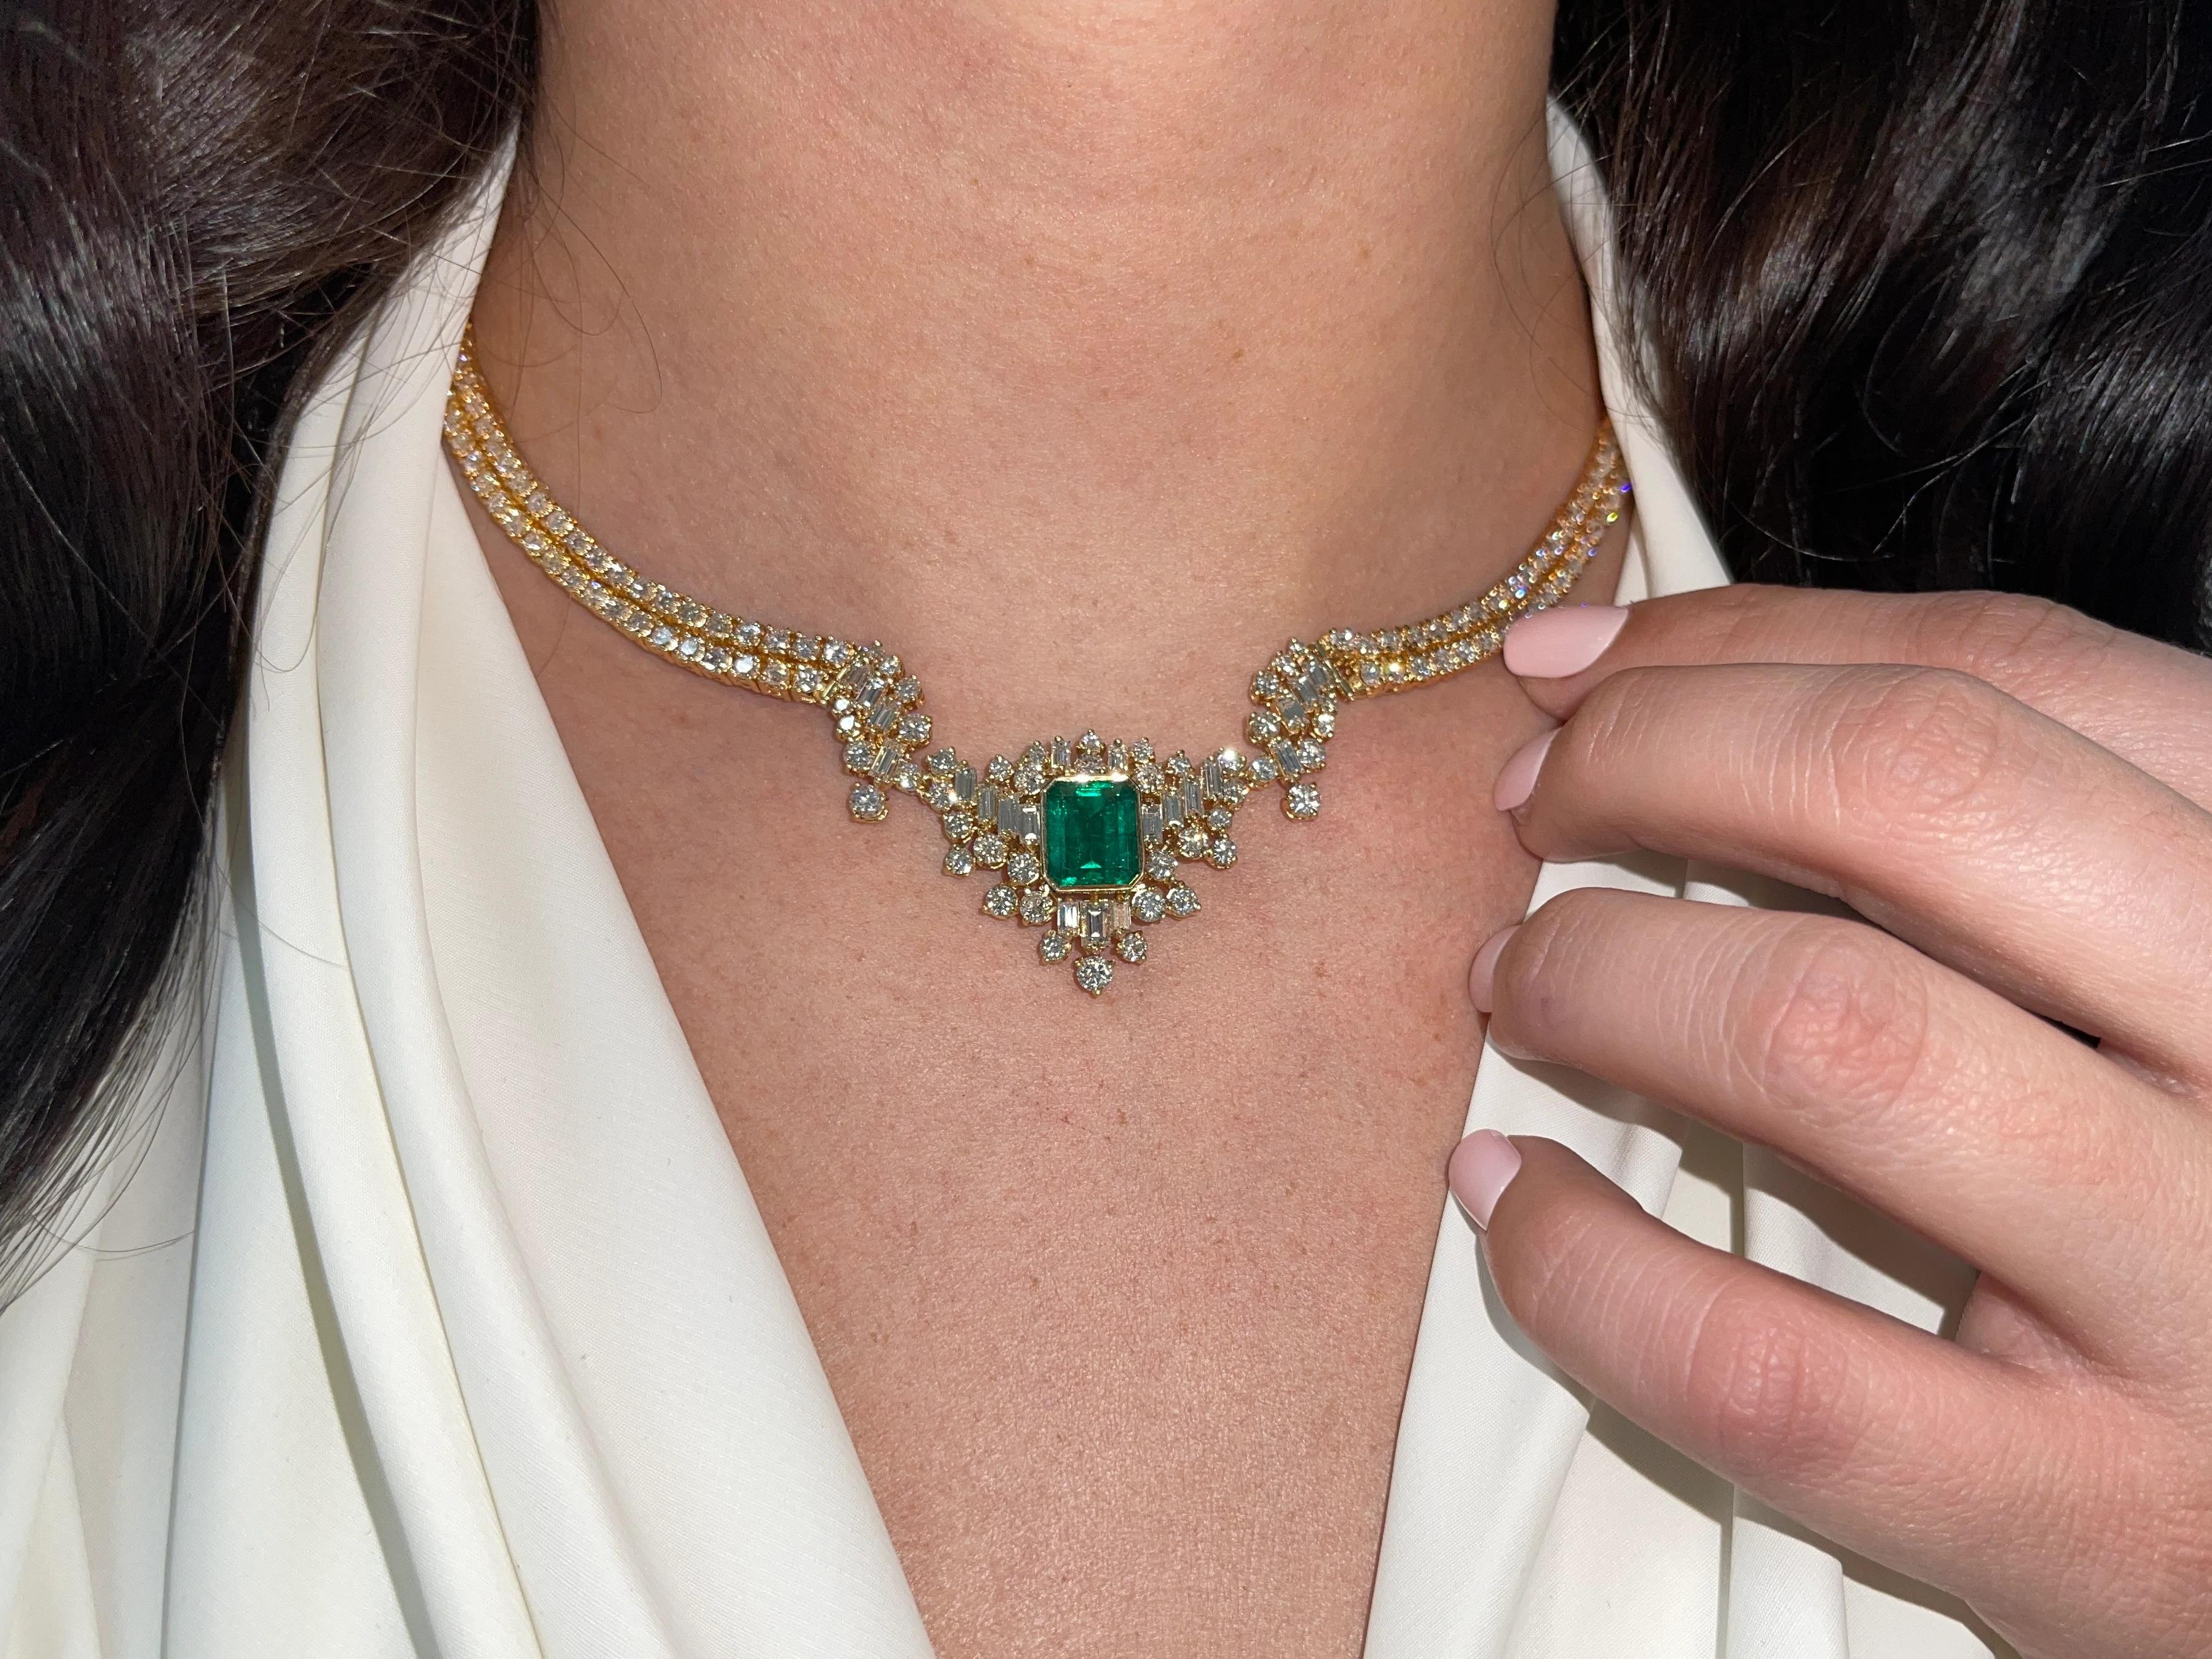 Displayed is an investment quality, vivid Muzo green Colombian emerald and diamond statement necklace. An extraordinary 3.85 carat, earth-mined emerald weighs 3.85 carats and is bezel set in sleek, 18K gold. Three hundred twenty-six diamonds are